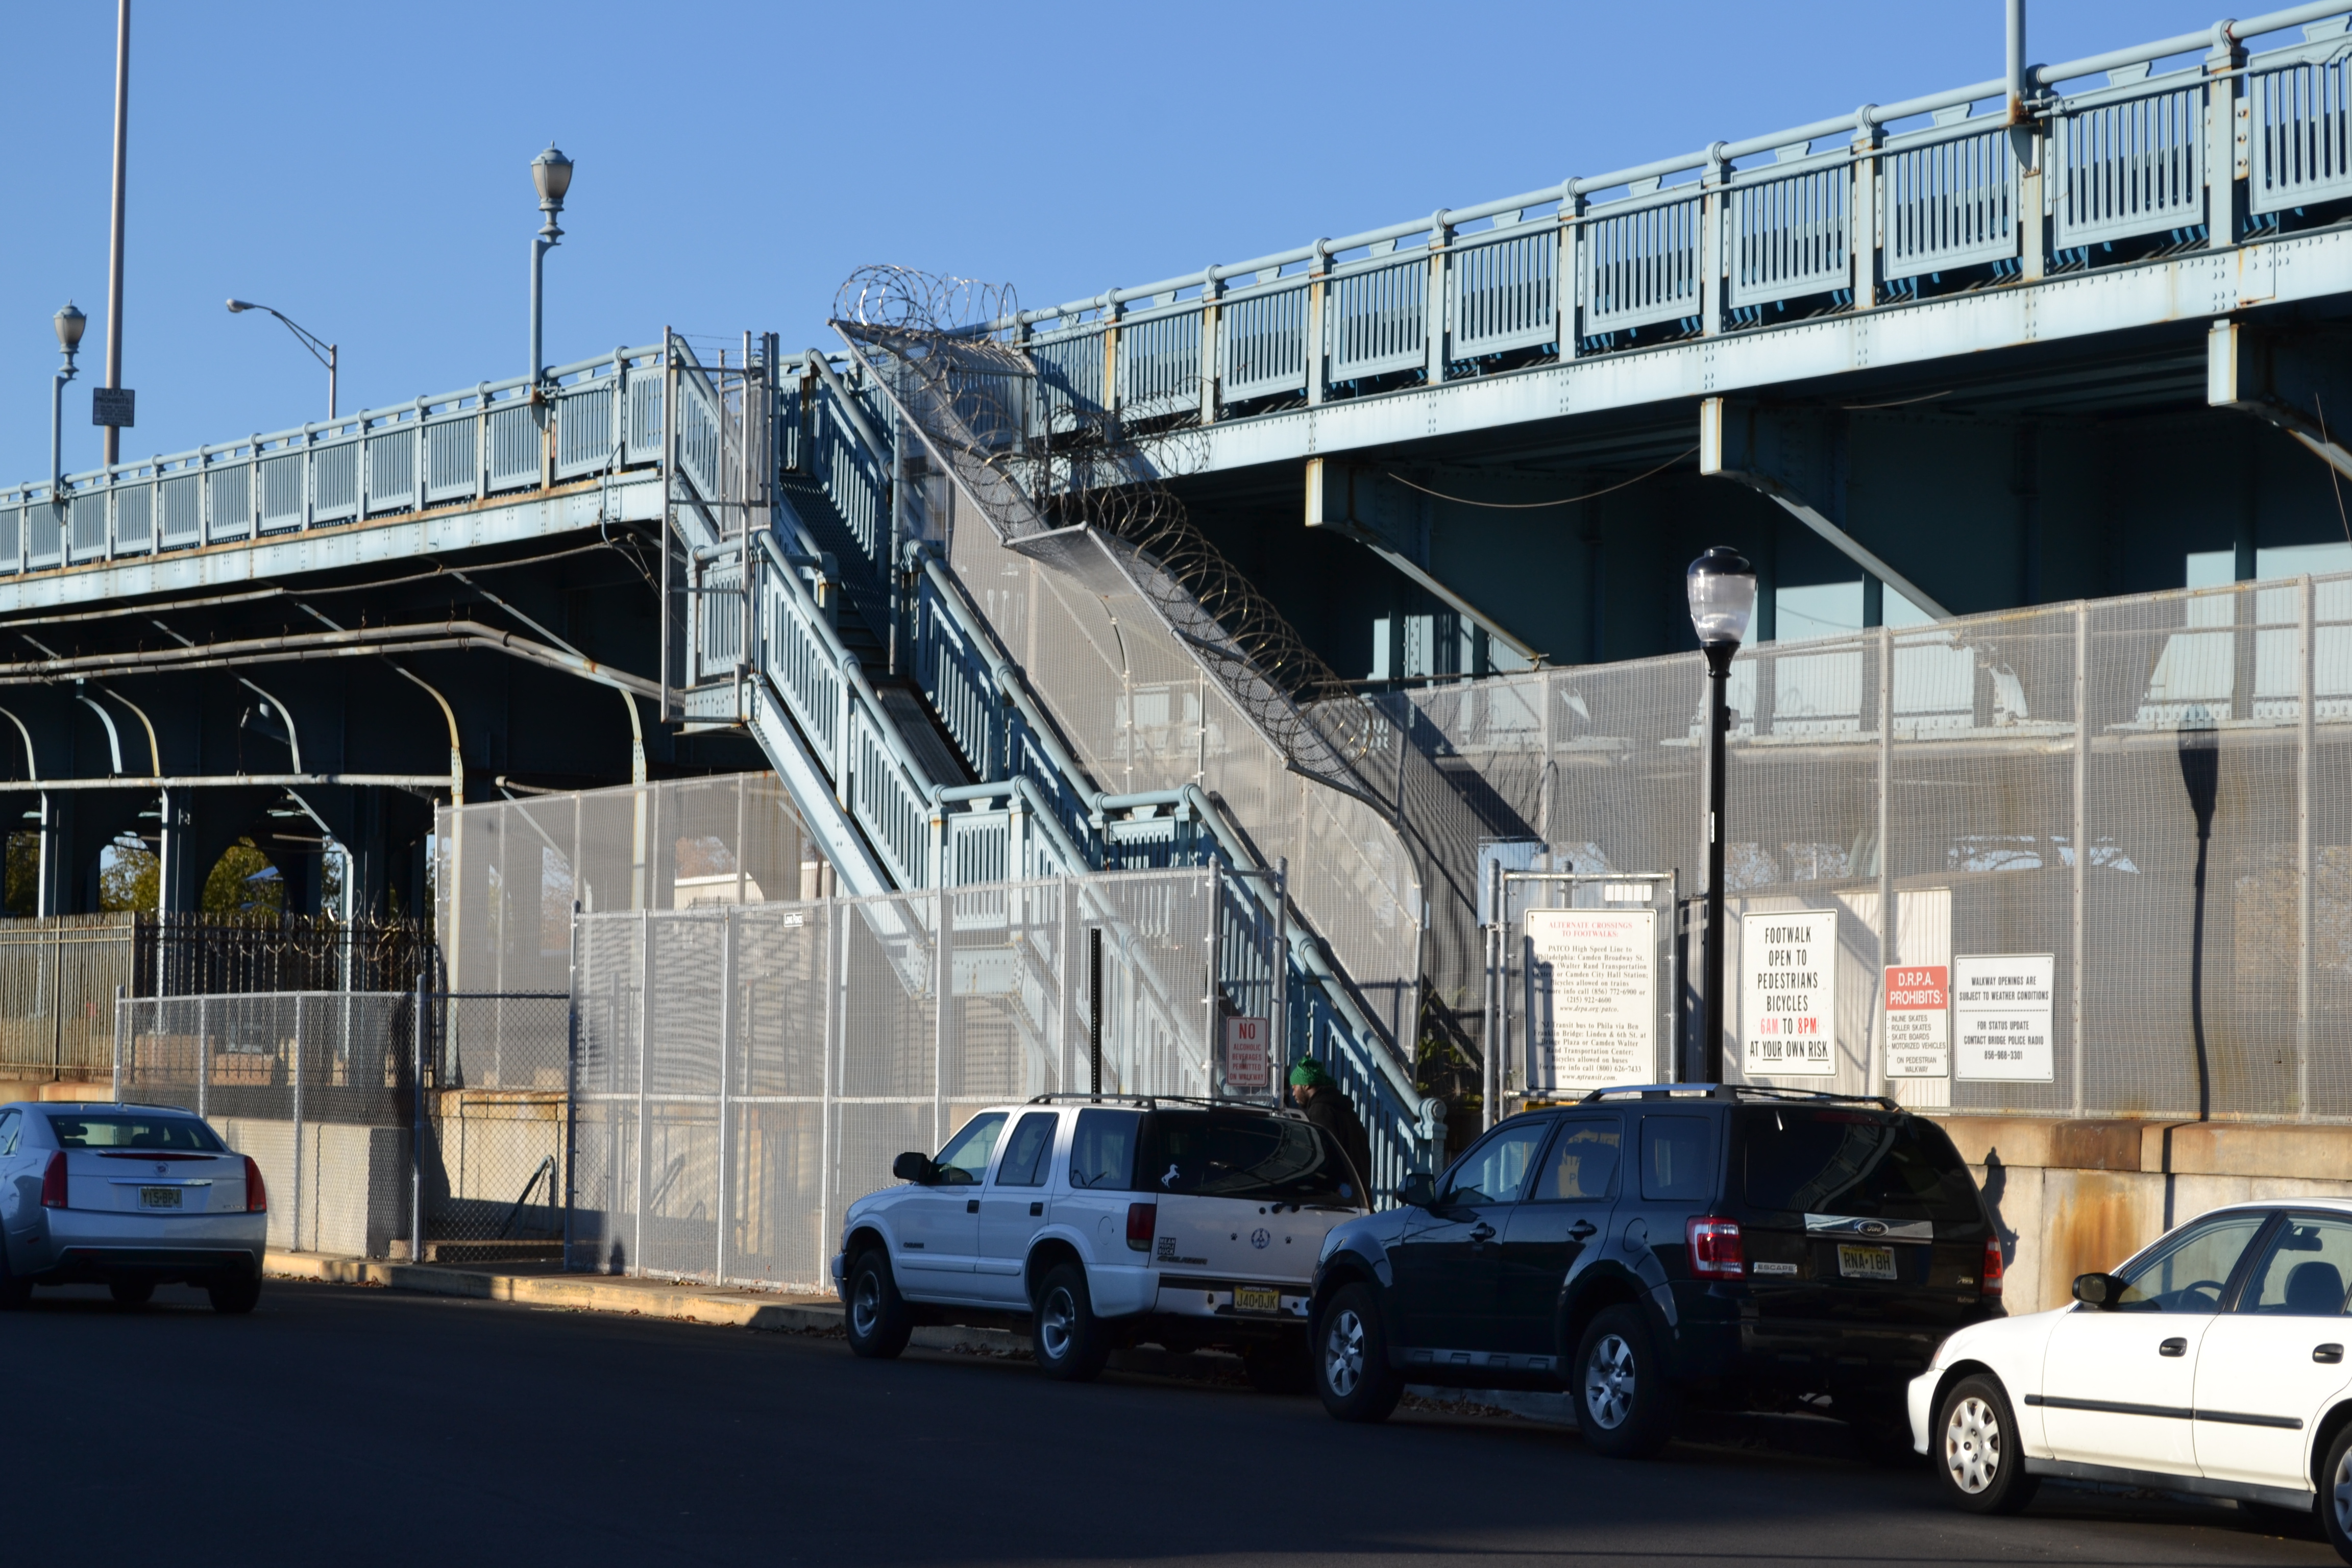 DRPA received $400,000 to replace the stairs up to the Ben Franklin Bridge with an ADA-compliant bicycle and pedestrian ramp